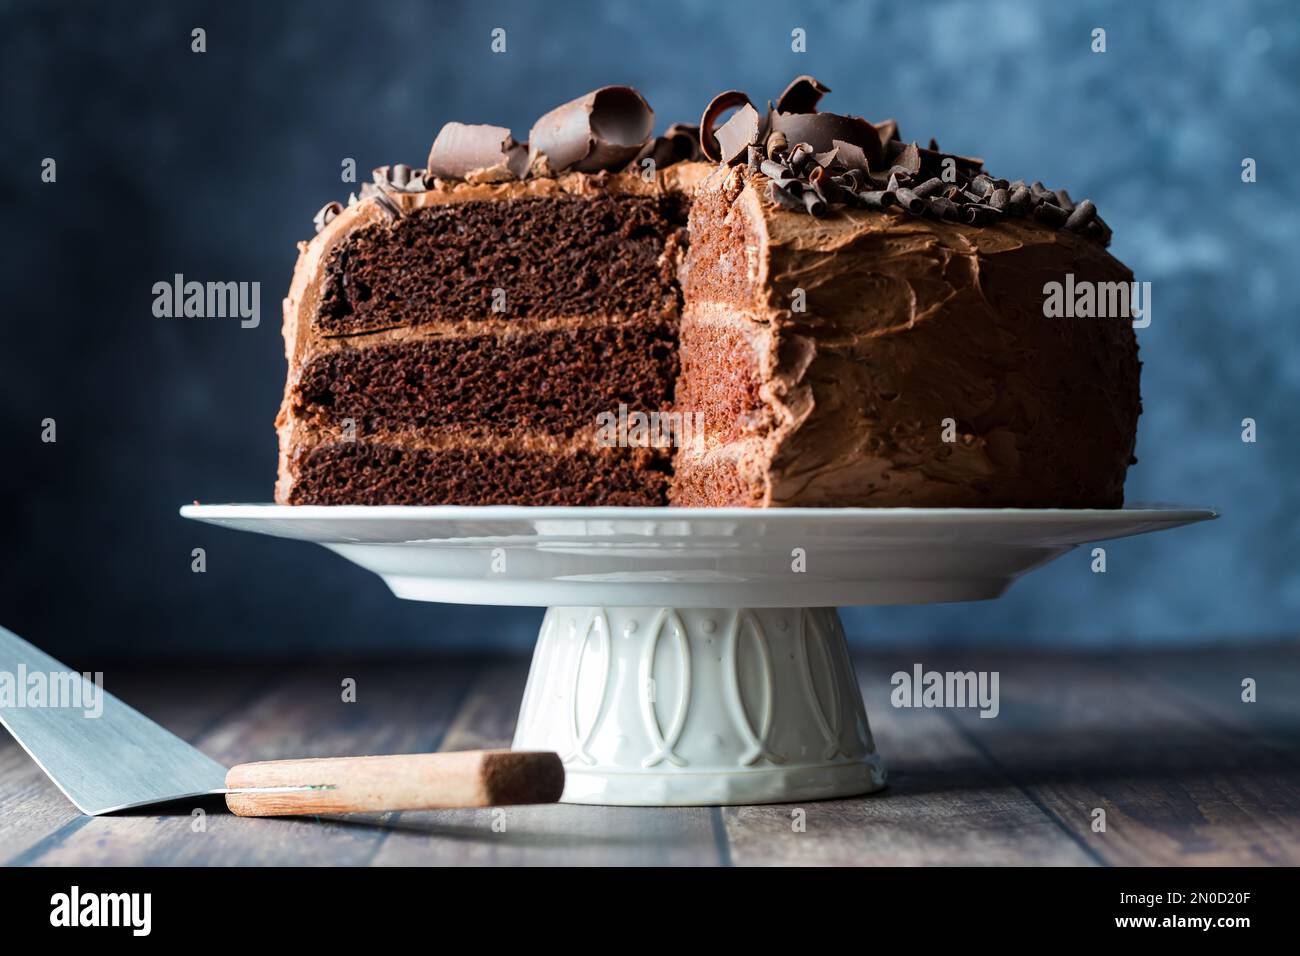 A triple layered homemade chocolate cake on a pedestal stand with slices removed Stock Photo